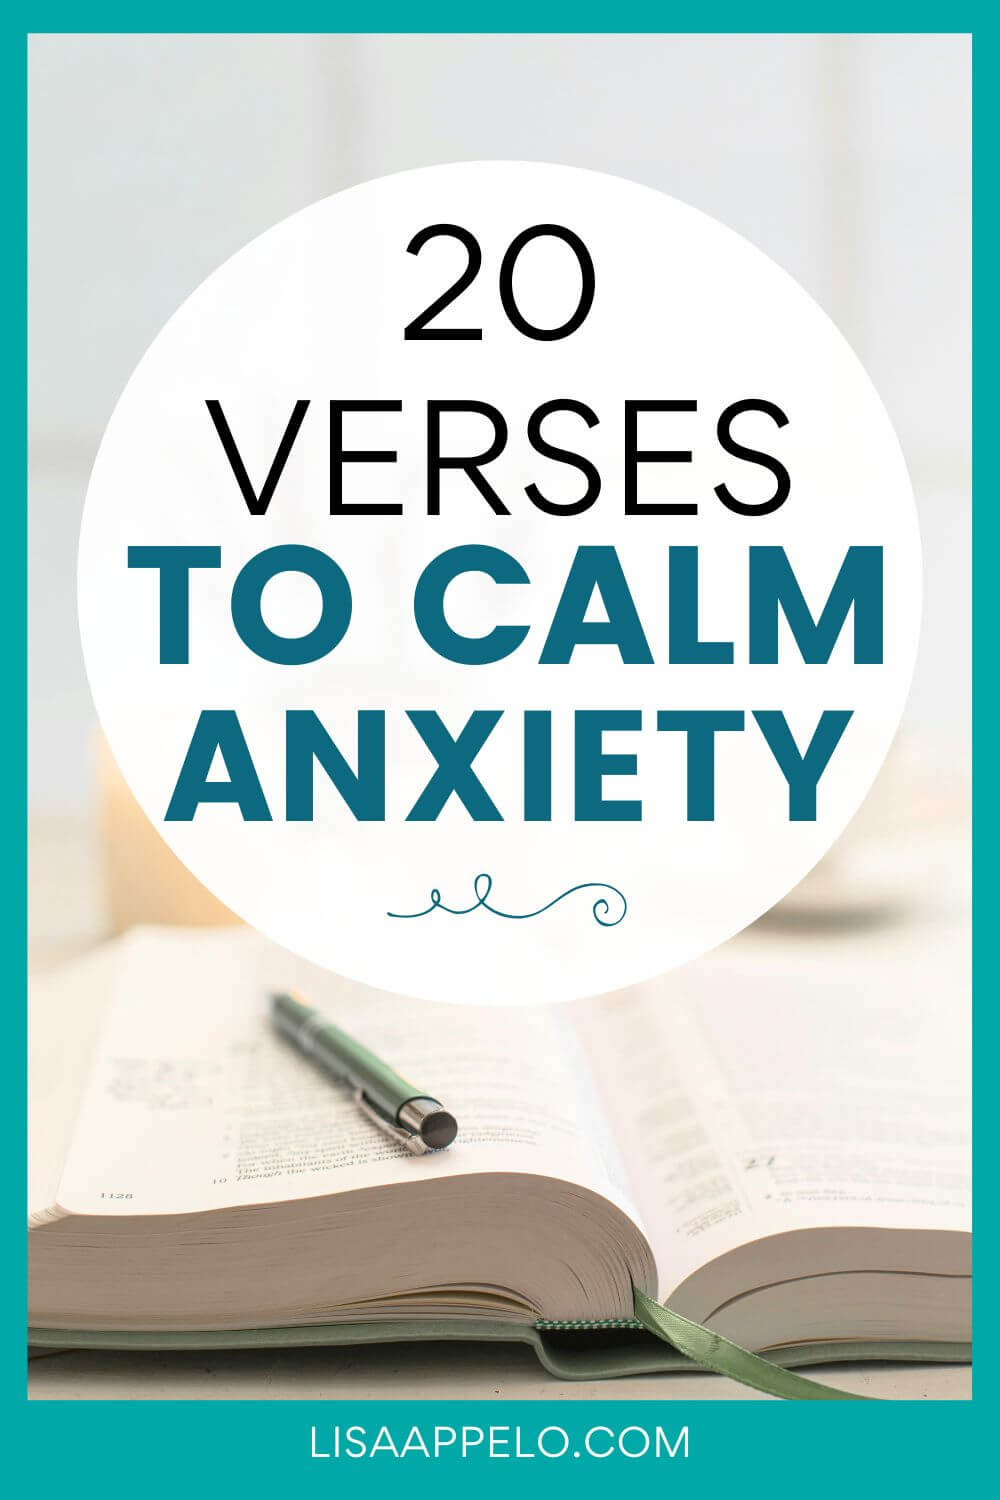 20 Bible Verses to Overcome Anxiety